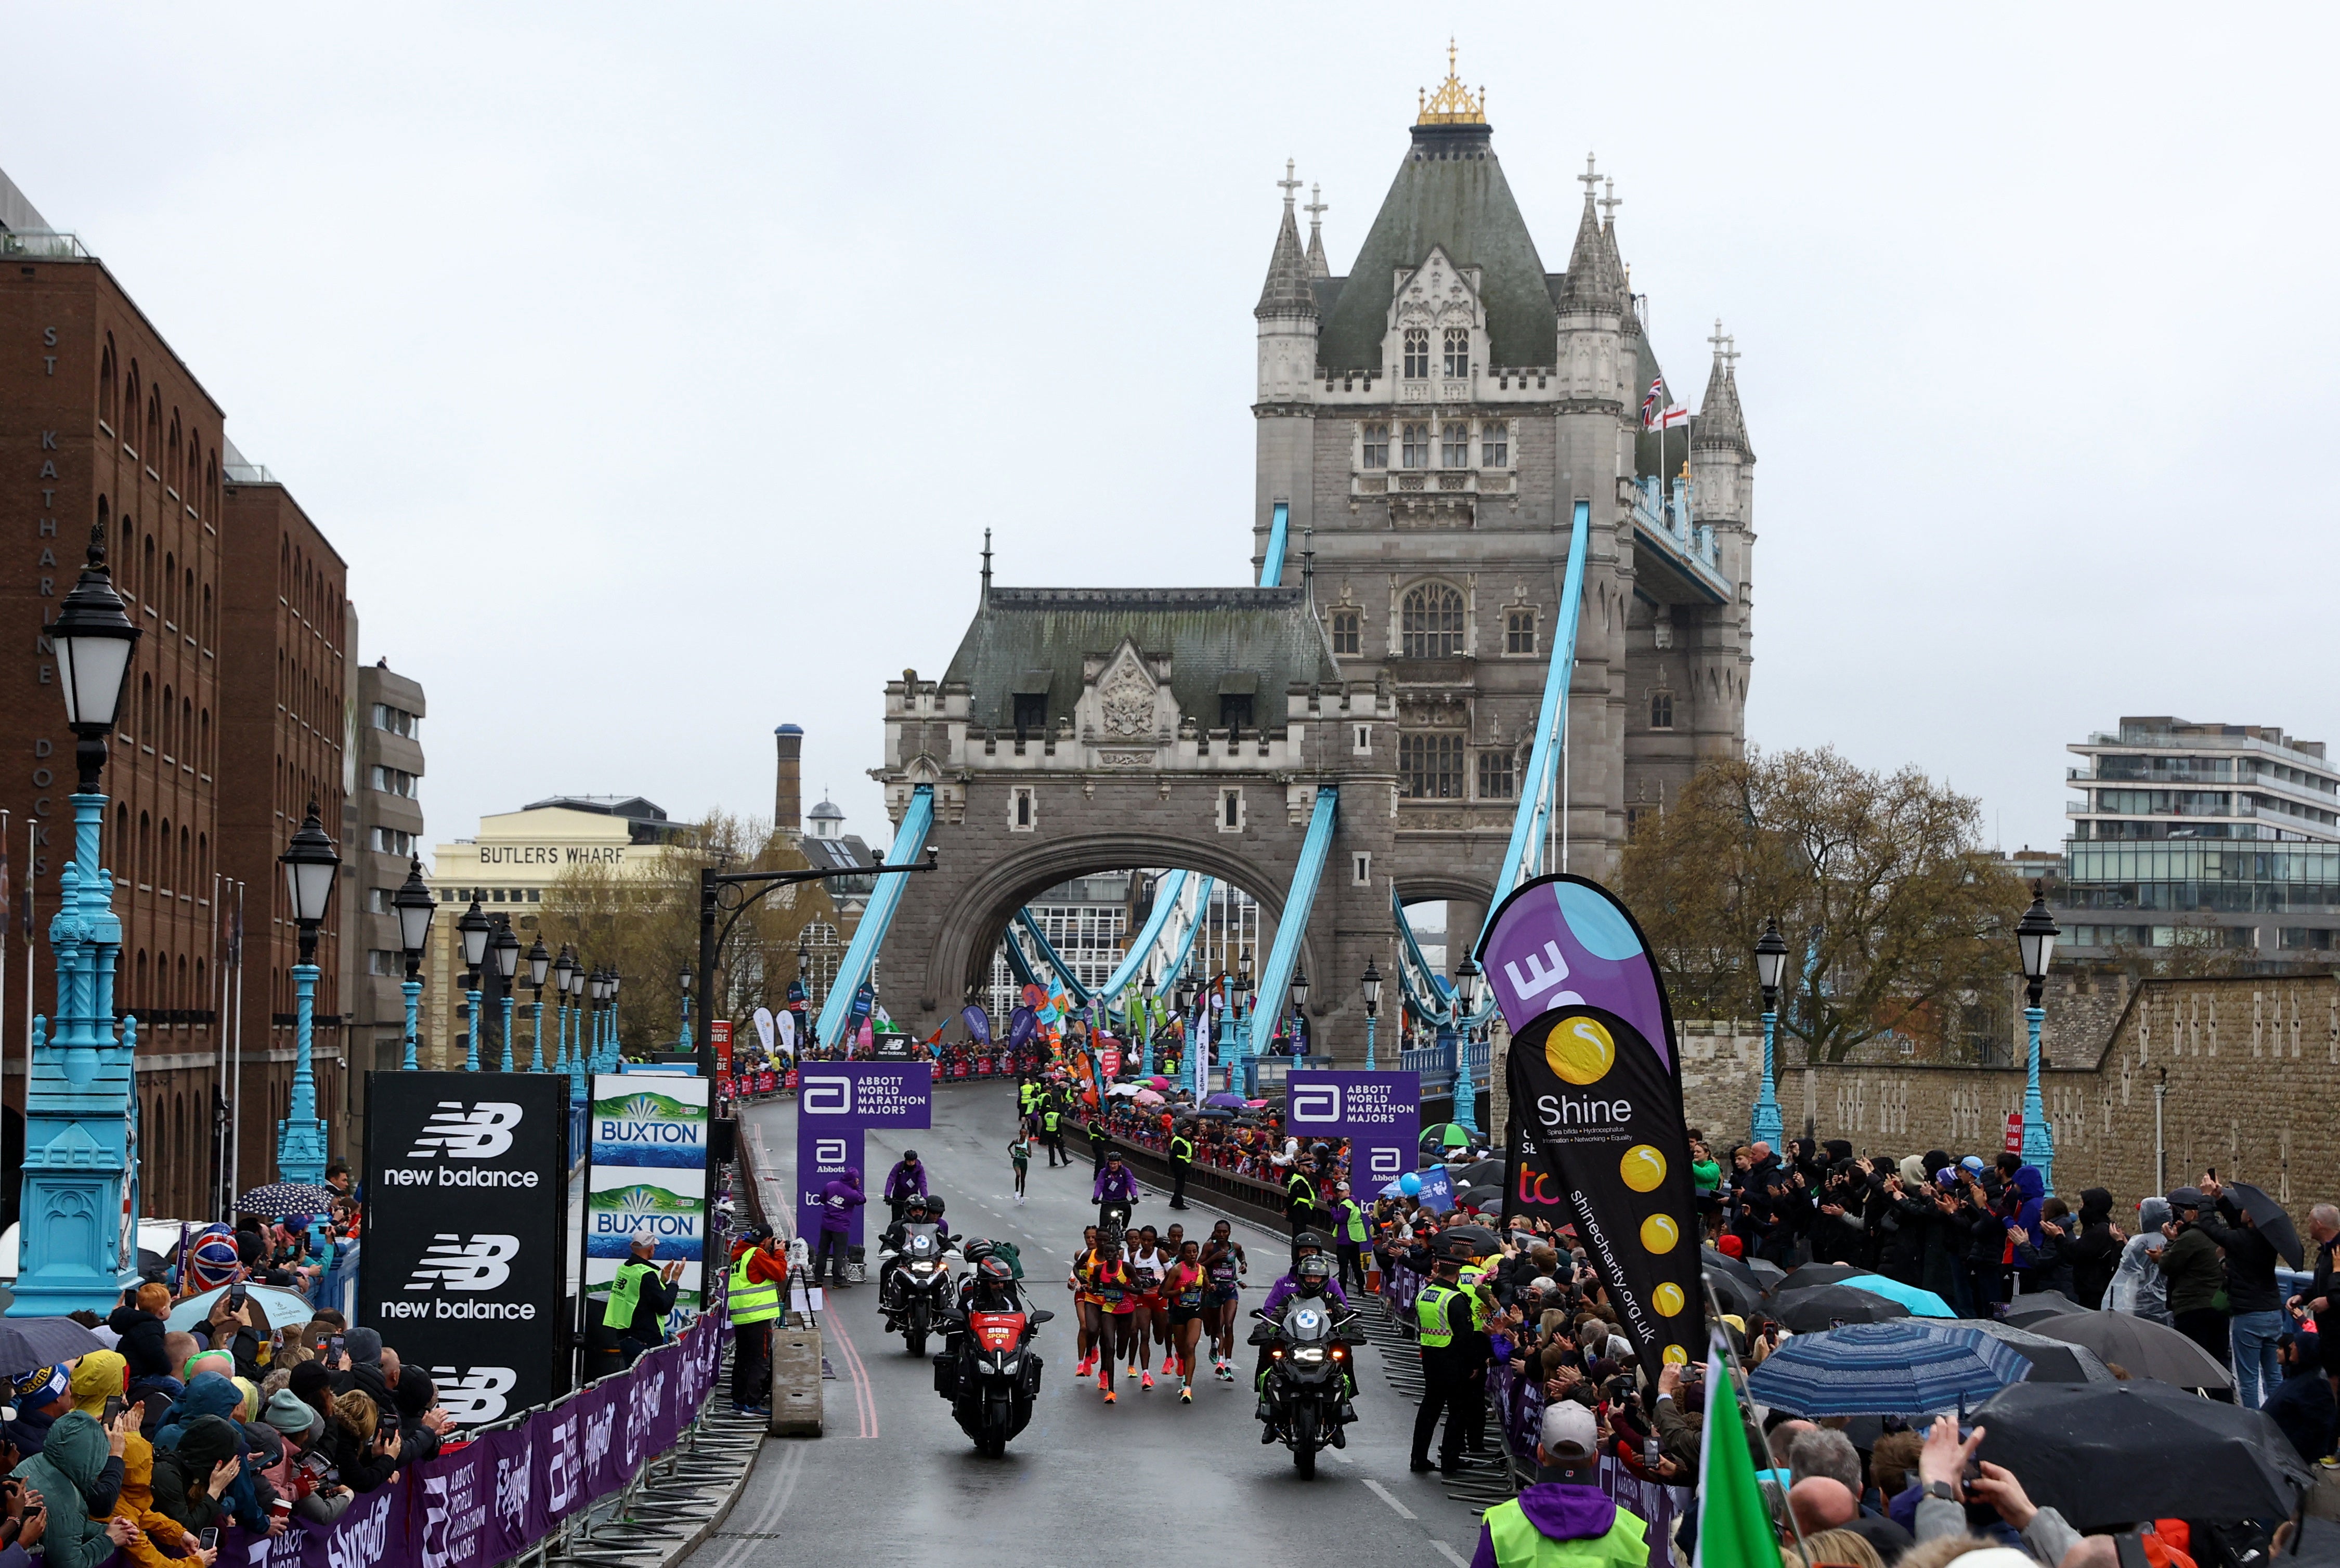 The course takes runners across Tower Bridge in central London